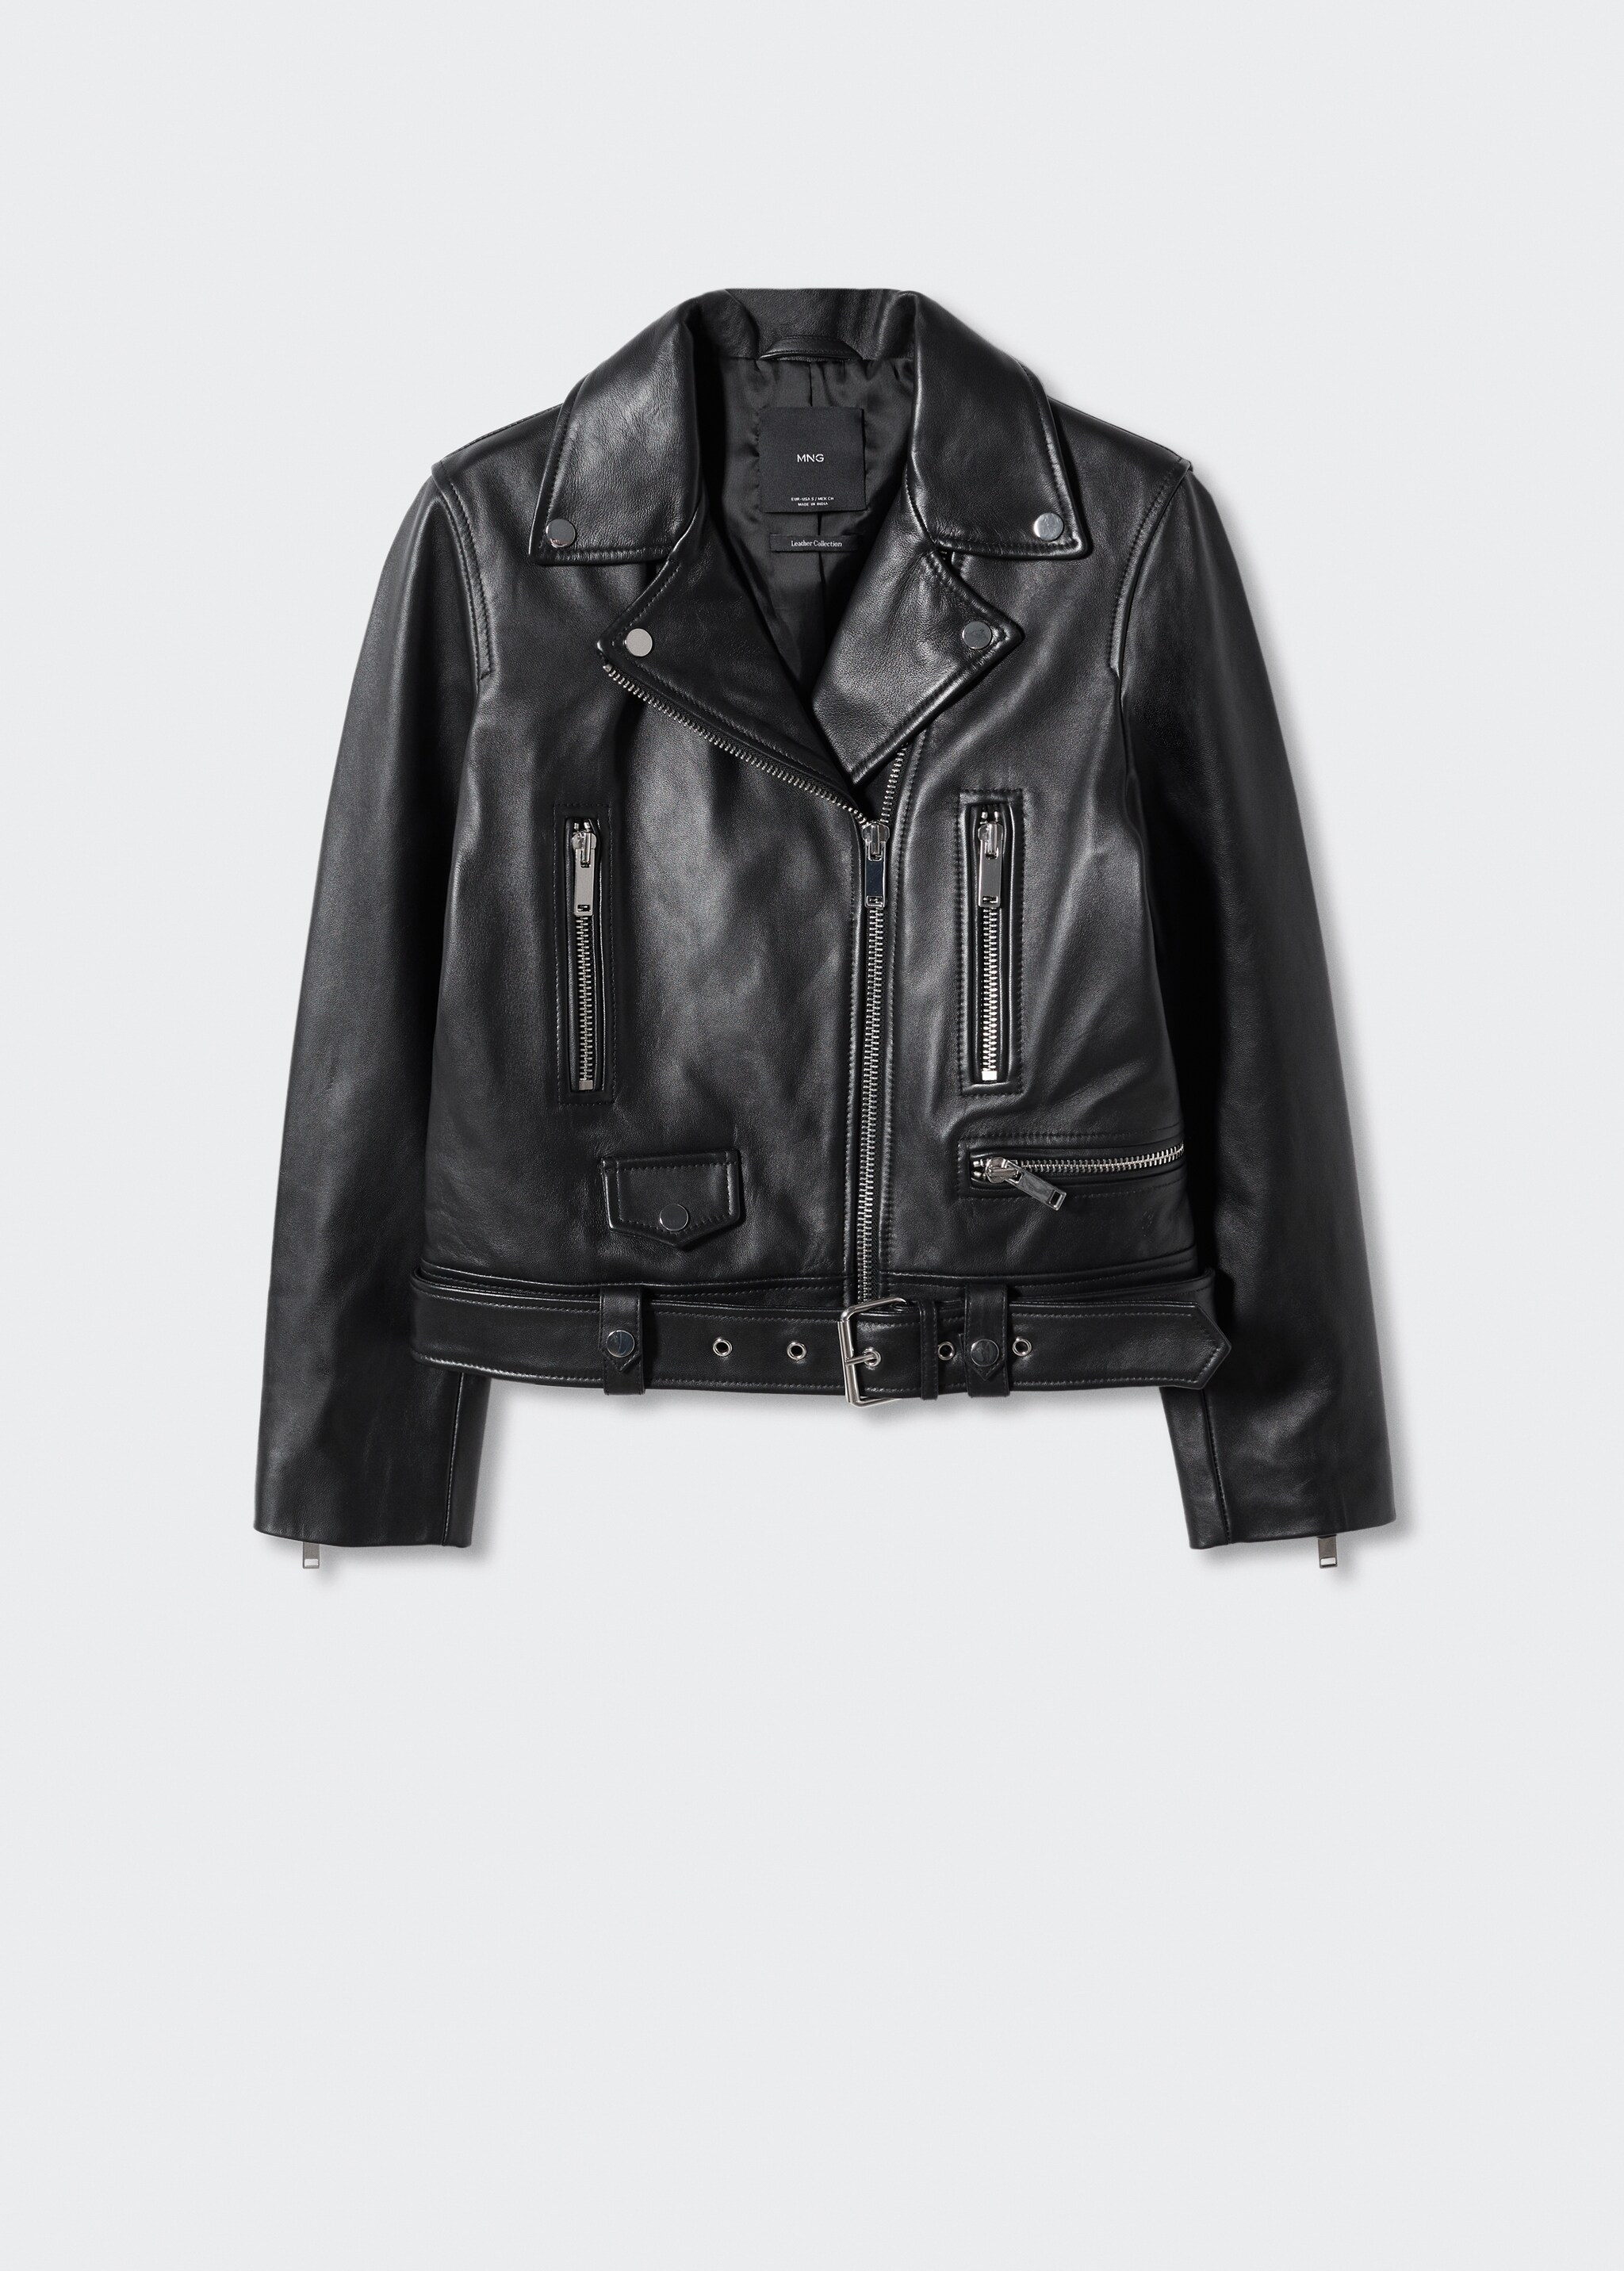 Leather biker jacket - Article without model